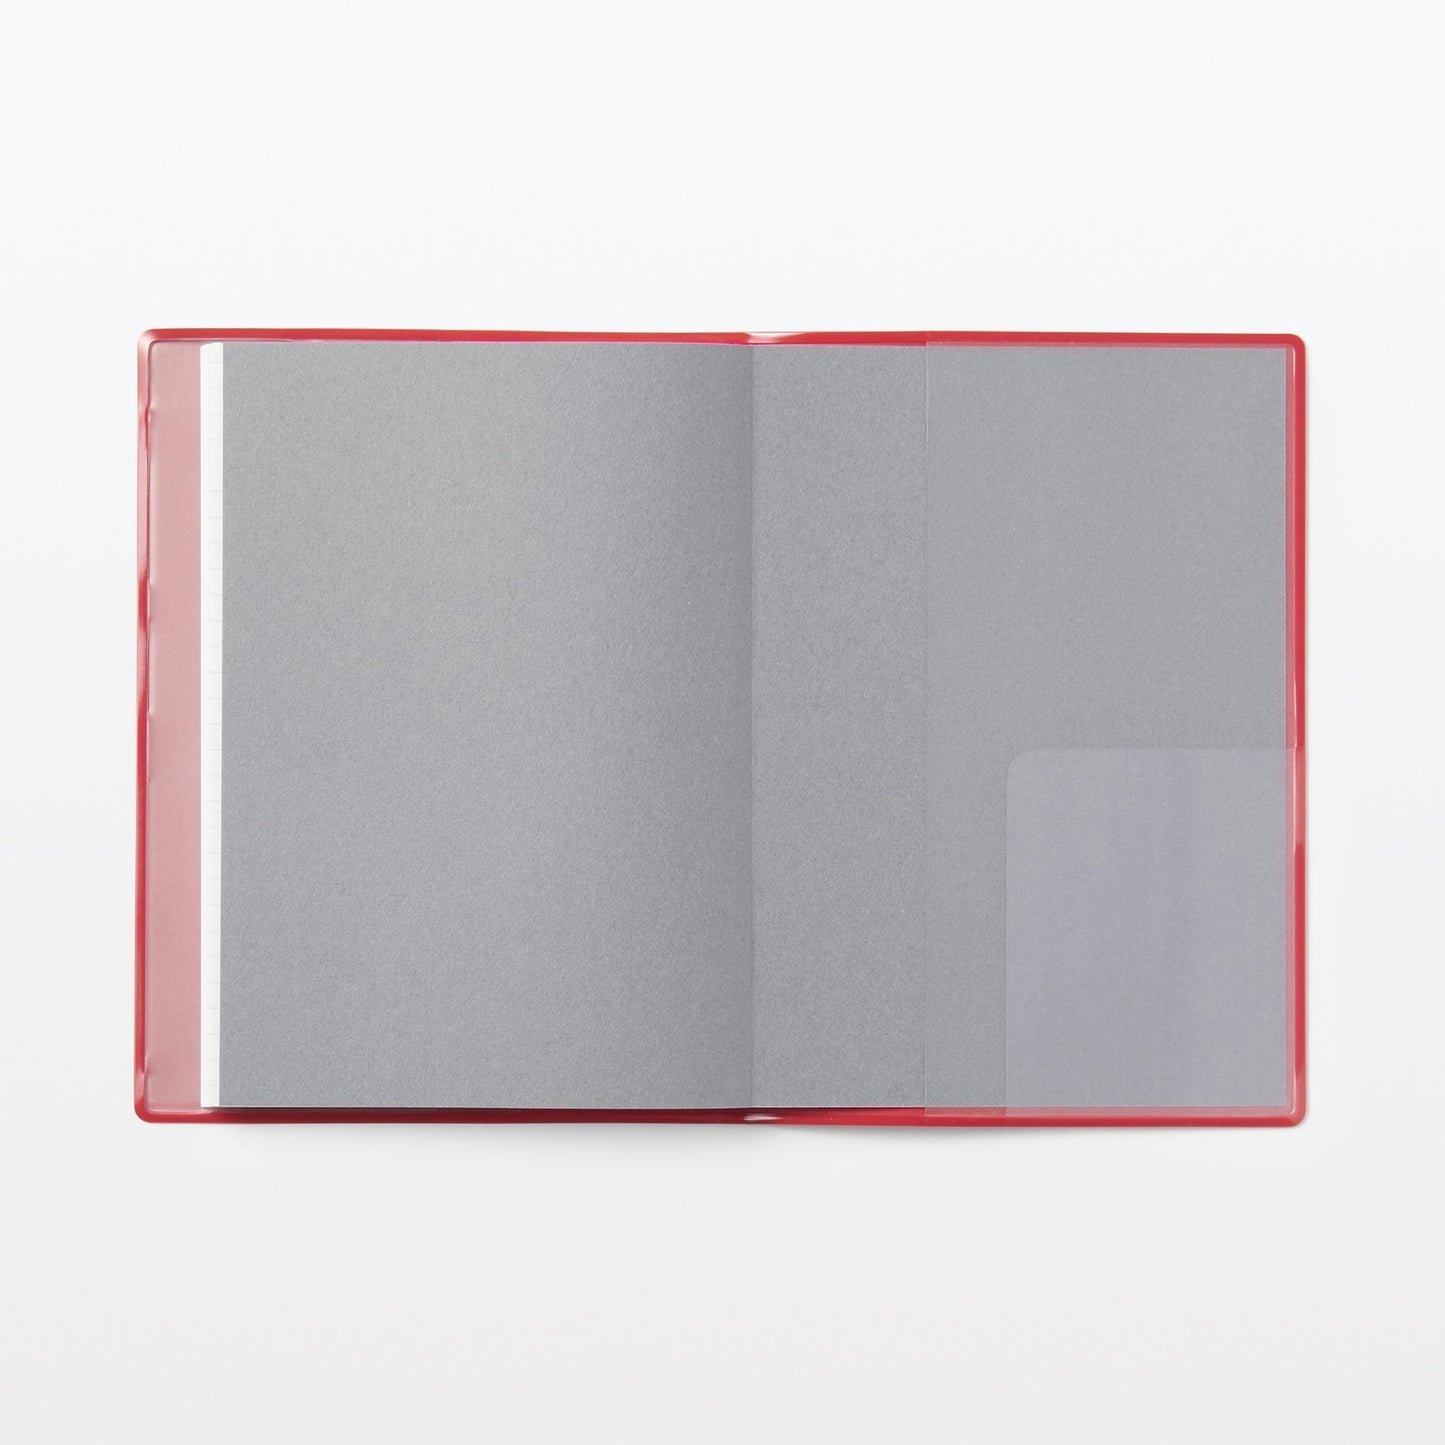 MUJI 2024 - Monthly / Weekly / Yearly Planner RED A5 (Starts December 23) USA